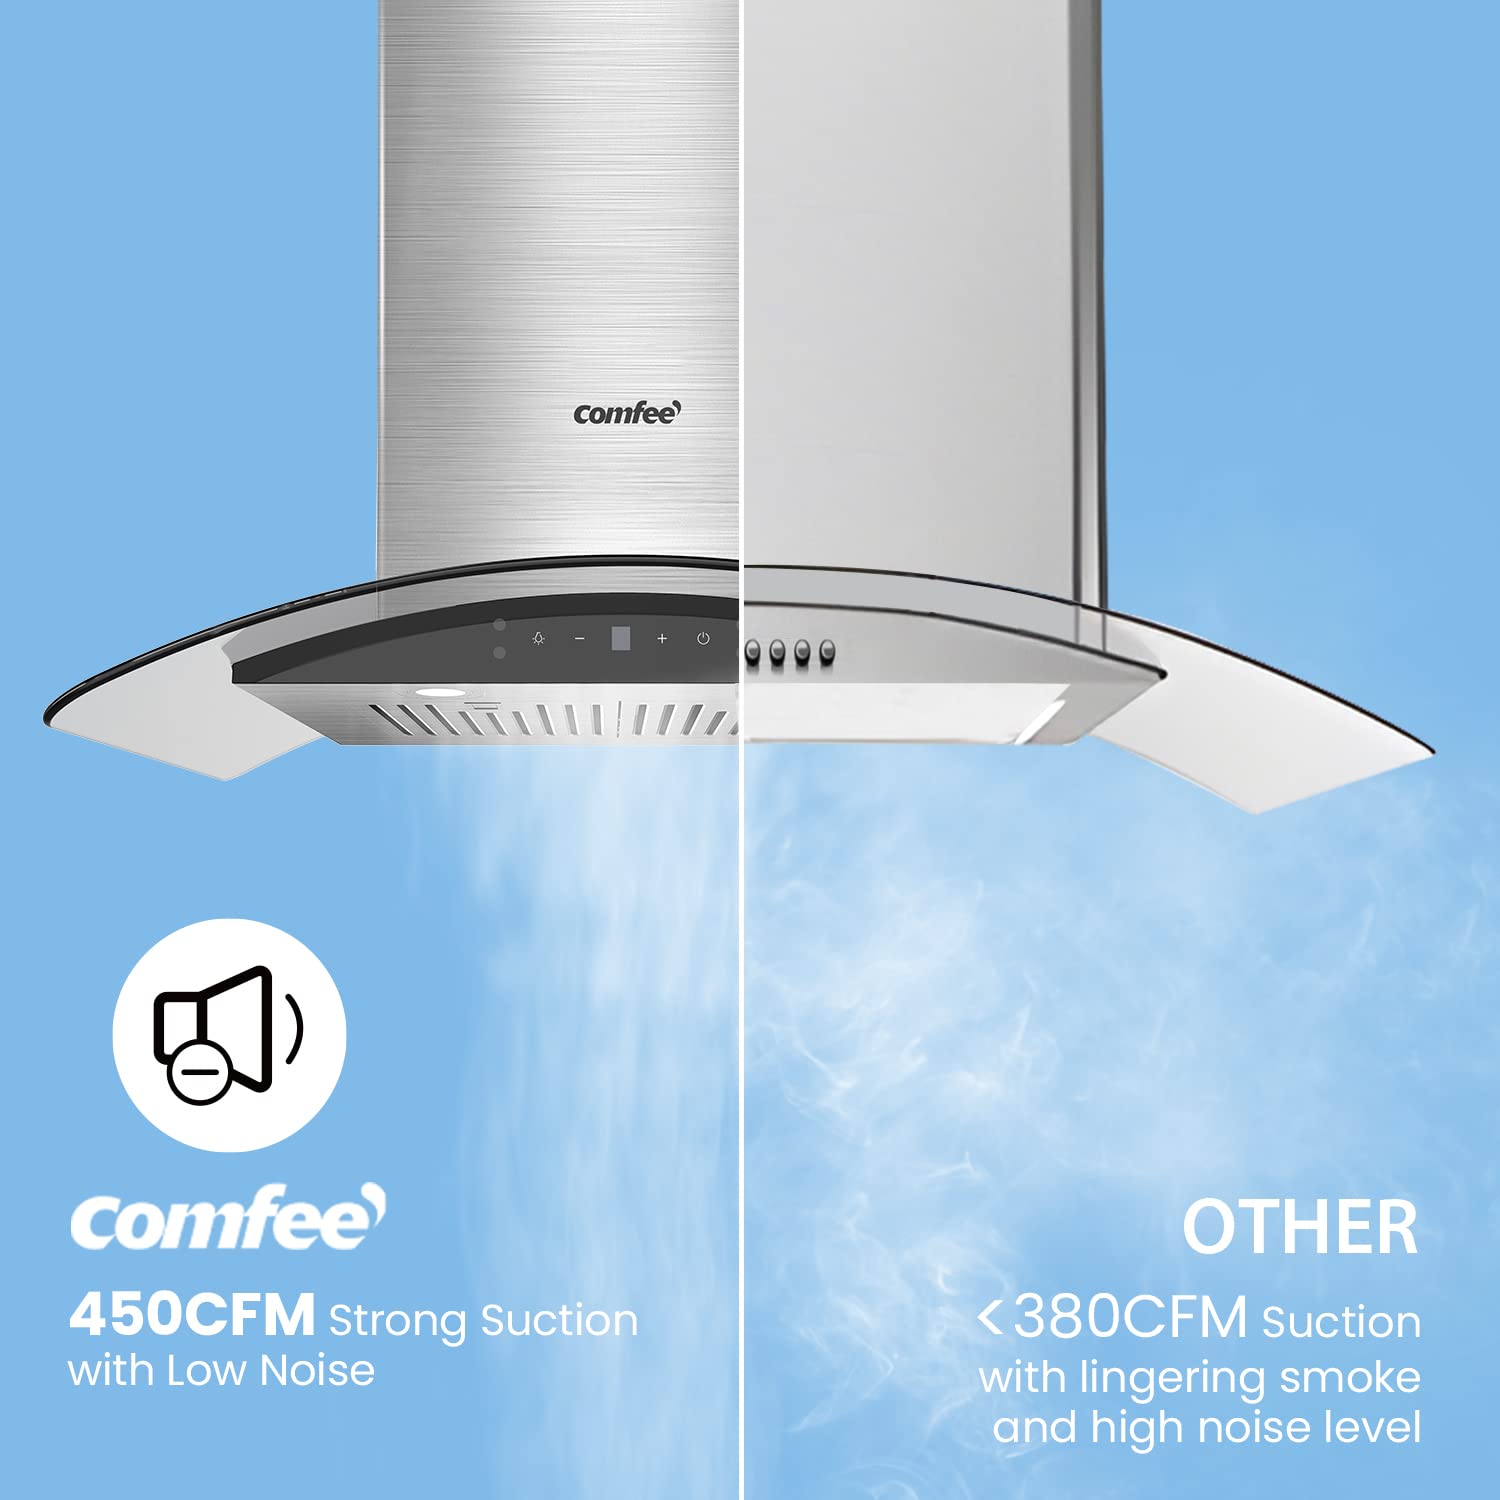 Comfee Curved Glass Range Hood 30 inch 450 CFM 3 Speed Gesture Sensing &Touch Control Panel Stainless Steel Kitchen Ductless/Ducted Convertible with